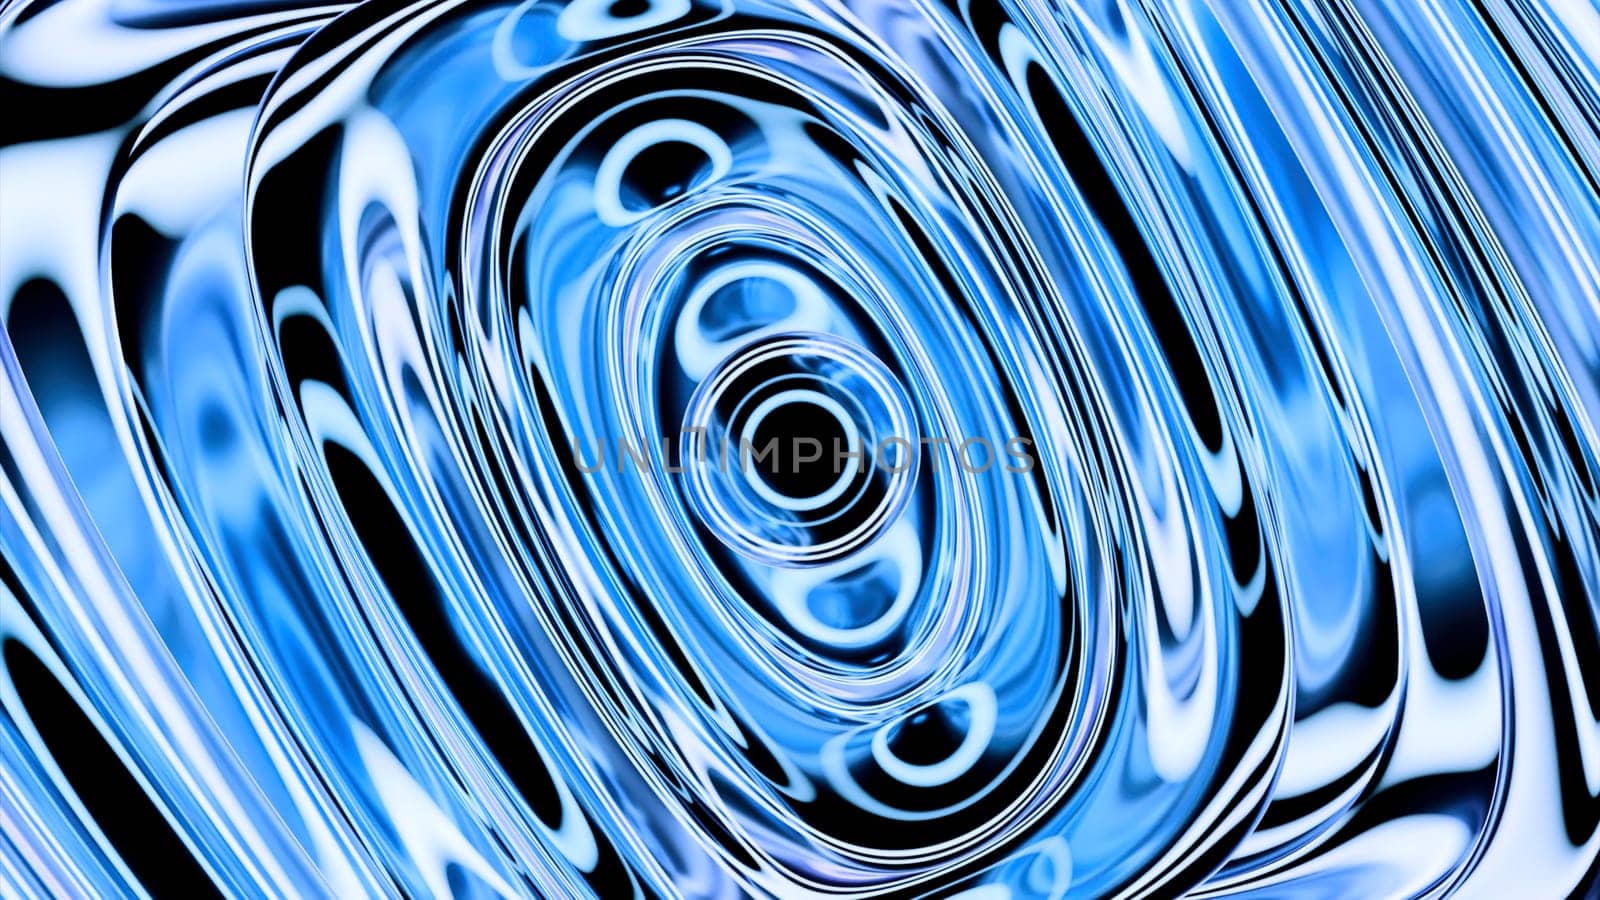 Abstract hypnotic liquid waves background. Design. Spreading rings of water of blue color